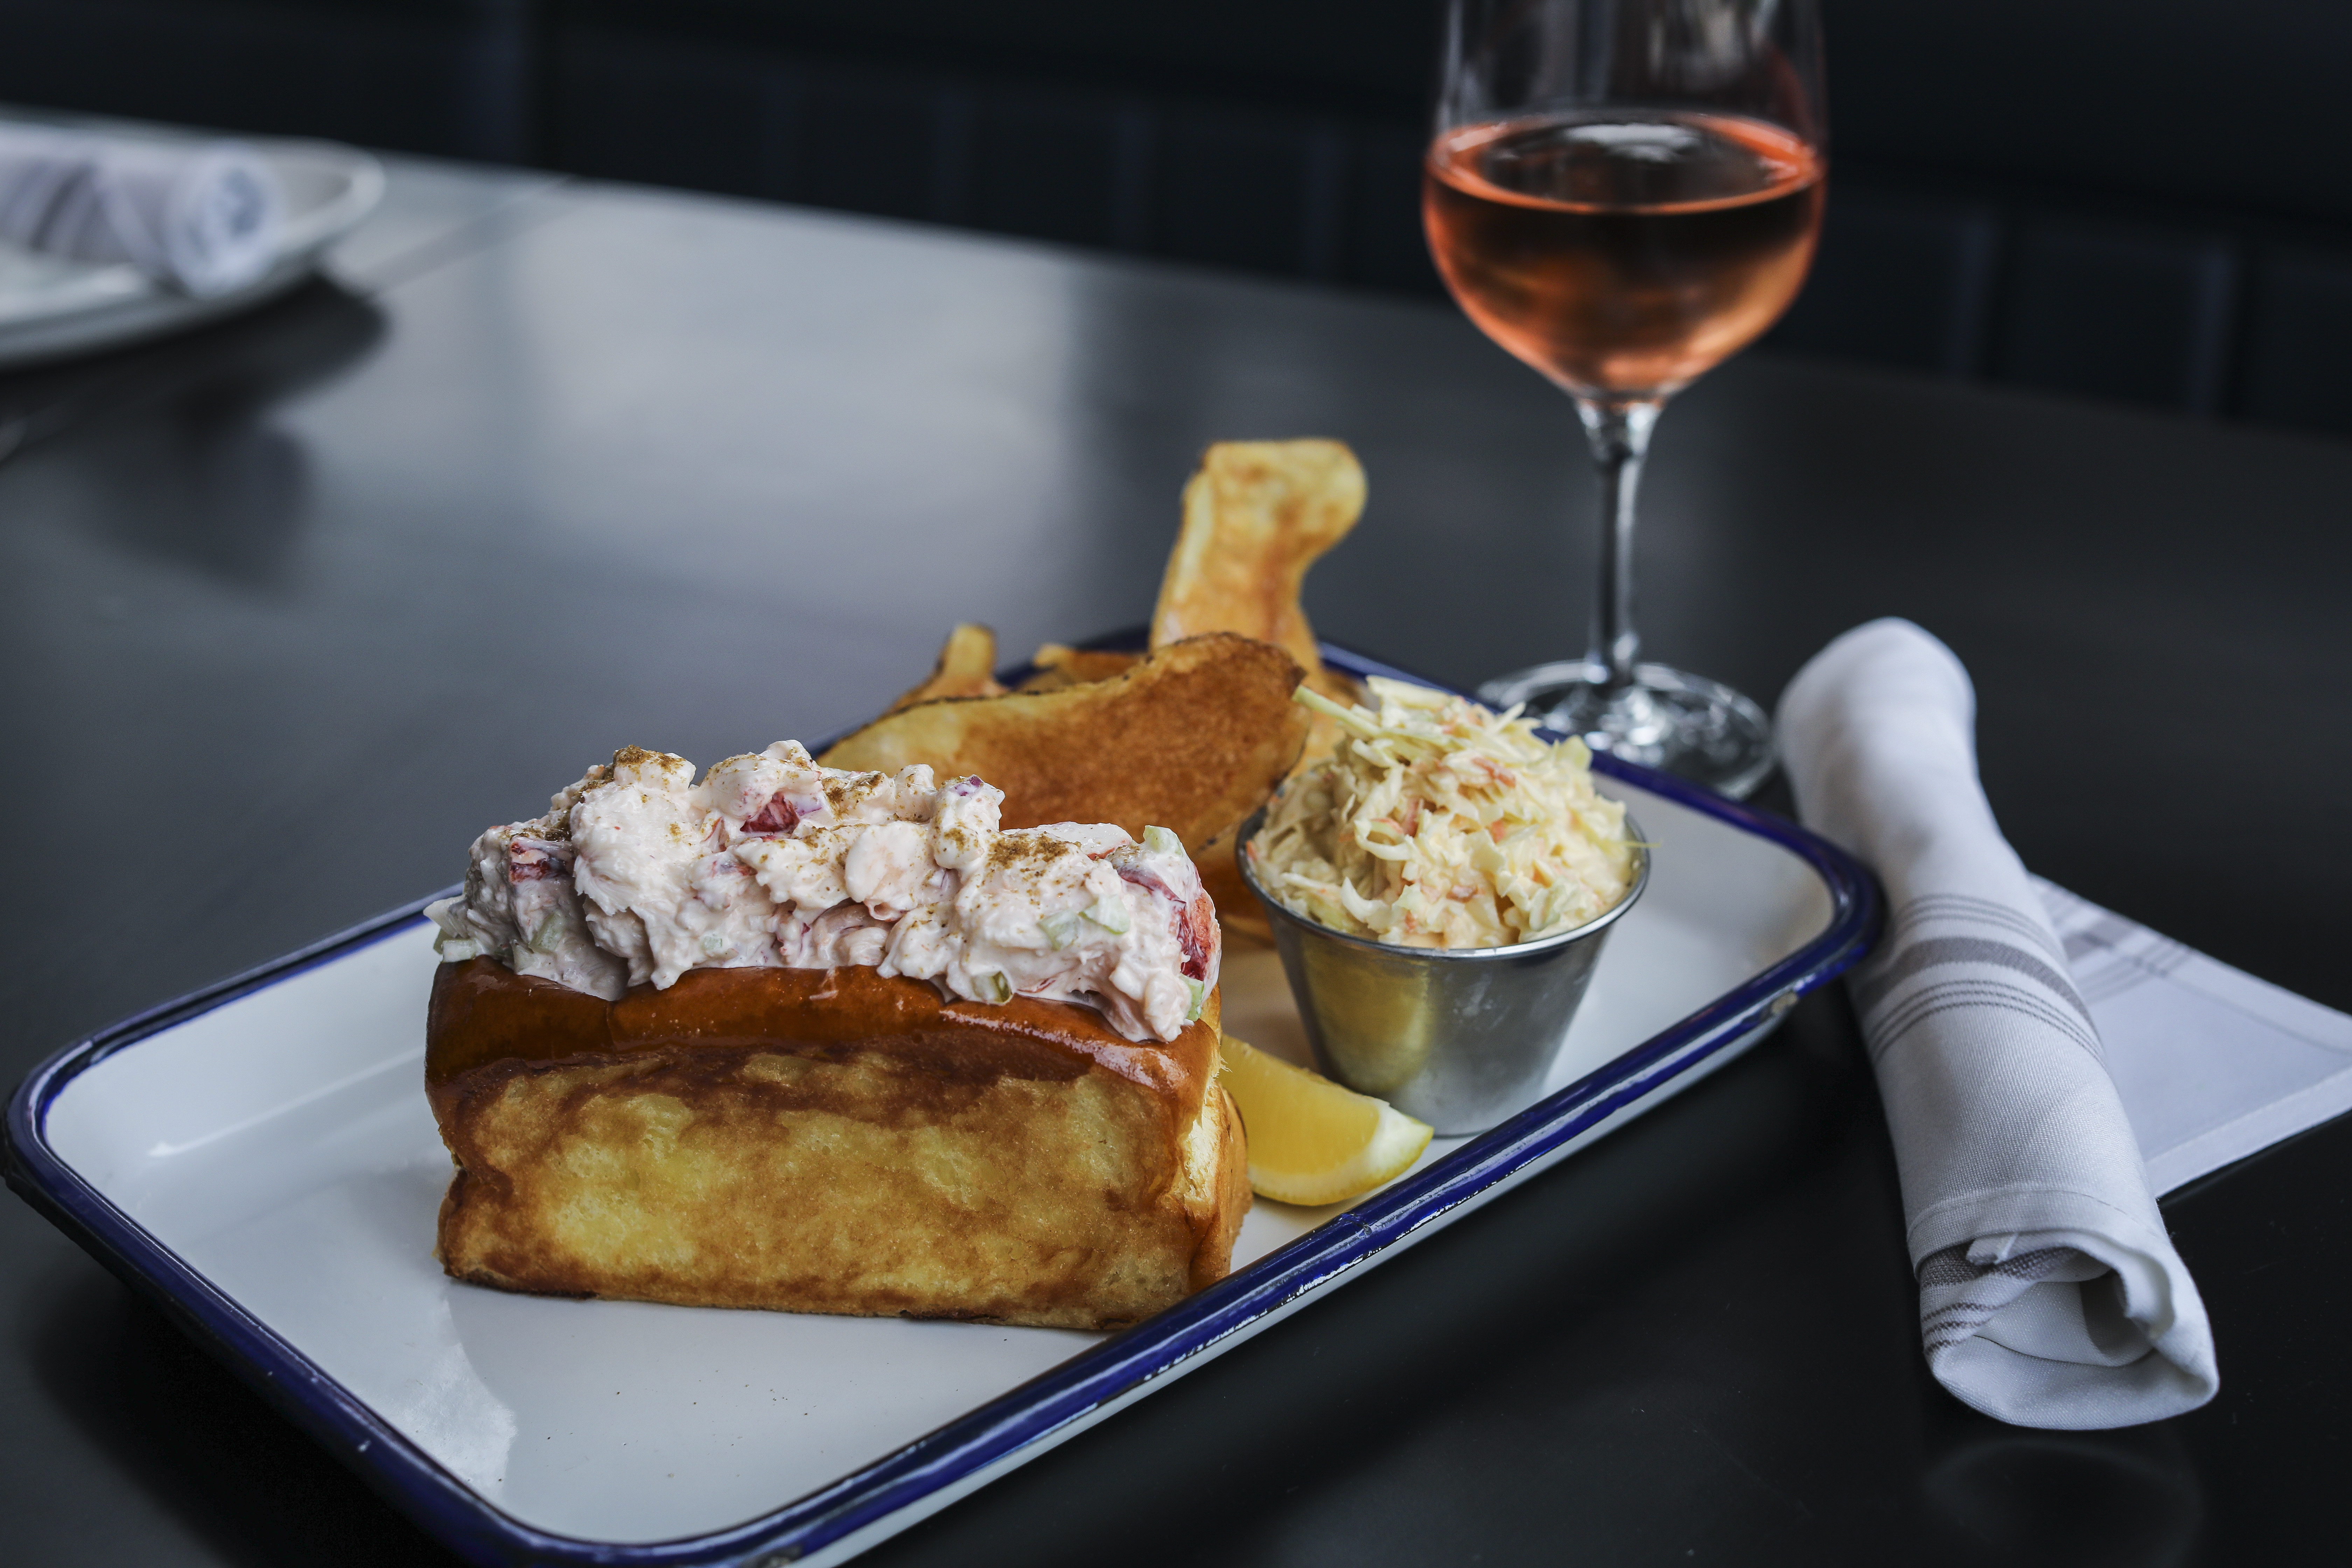 Ethel's Creamy Lobster Roll served on brioche bread with homemade french fries and coleslaw. 